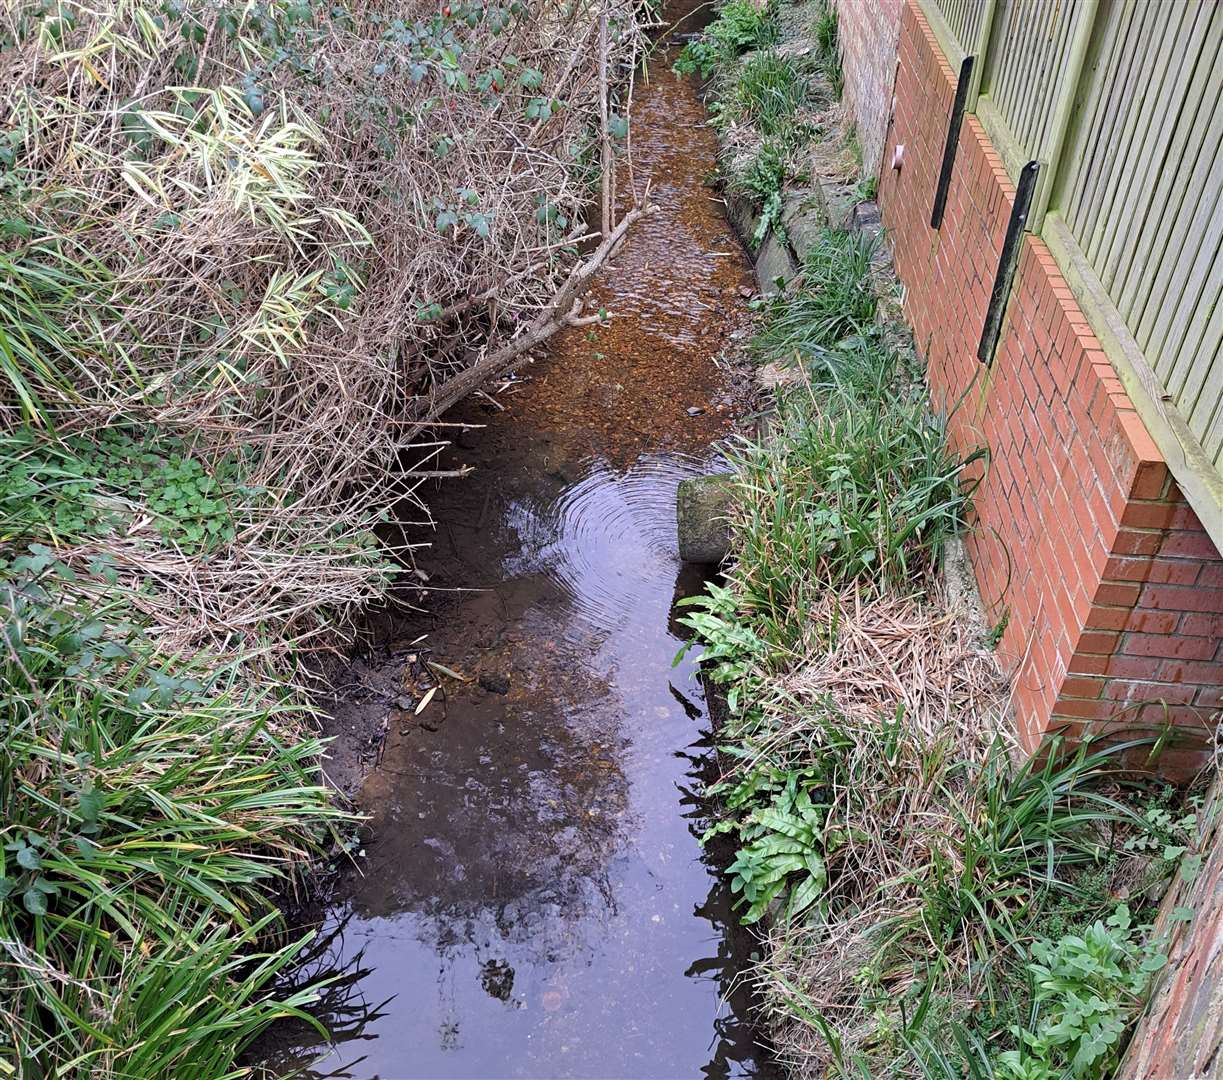 The stream is now back to its normal colour